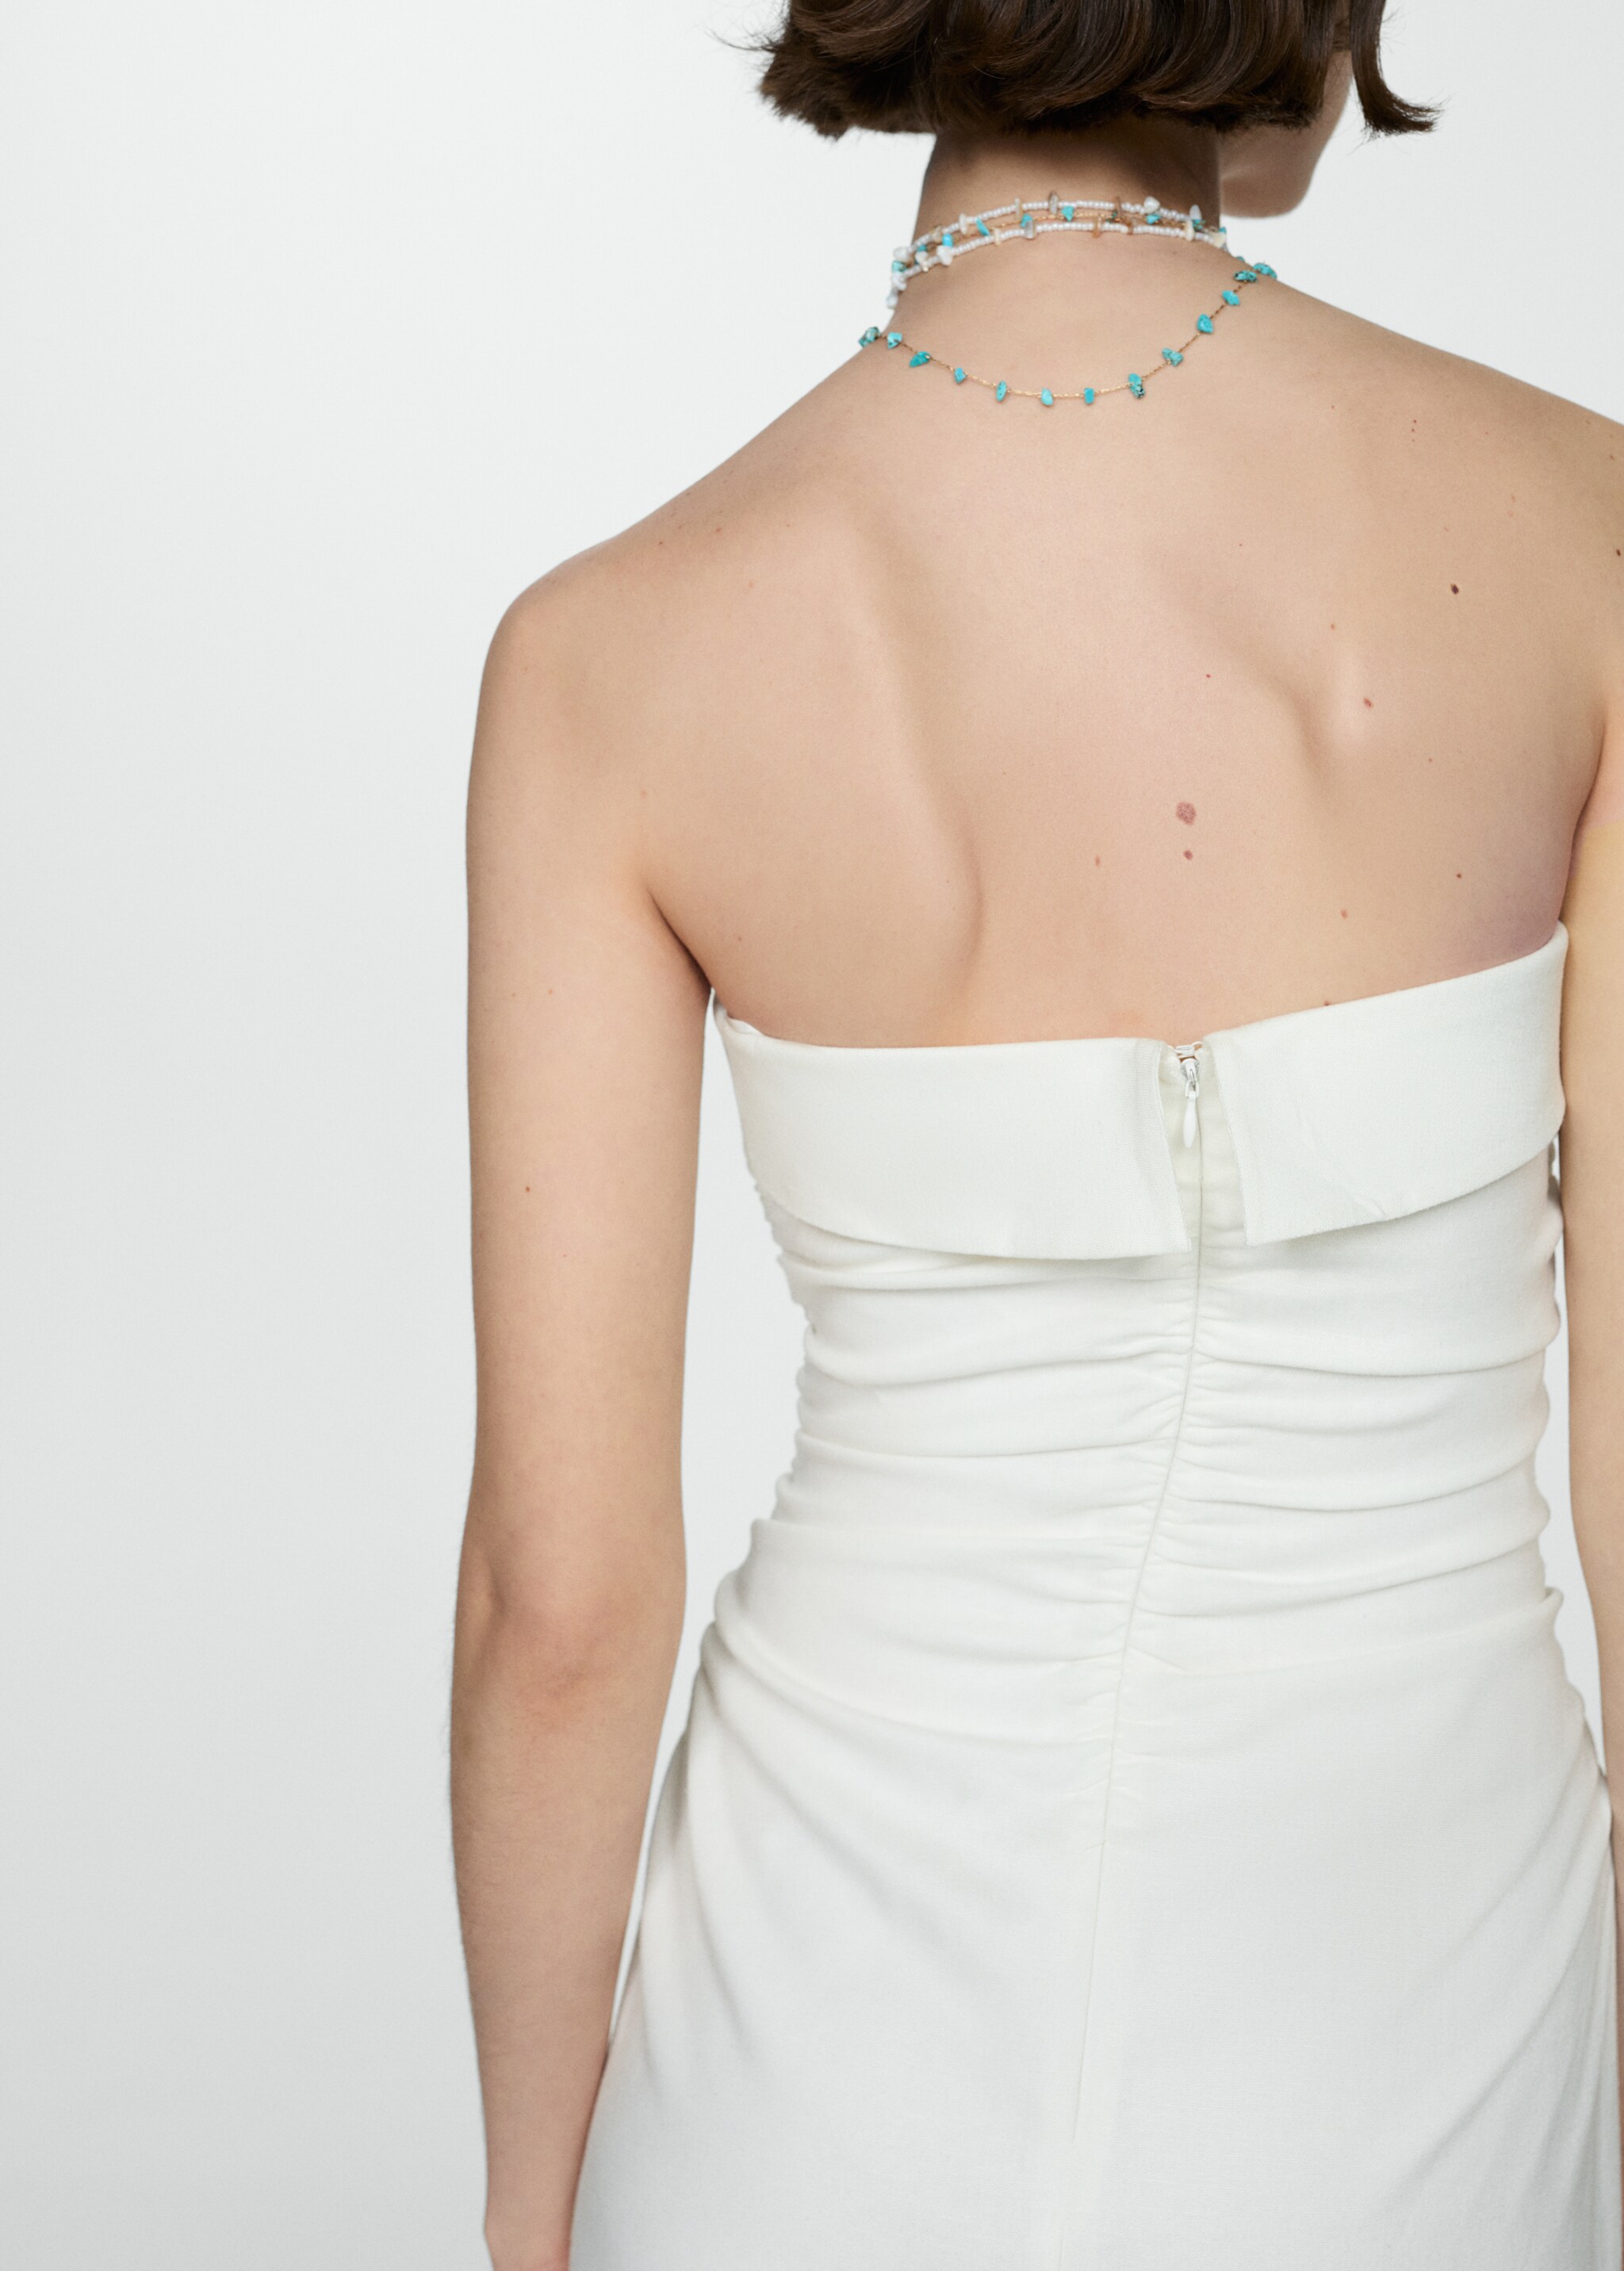 Draped detail dress - Details of the article 2